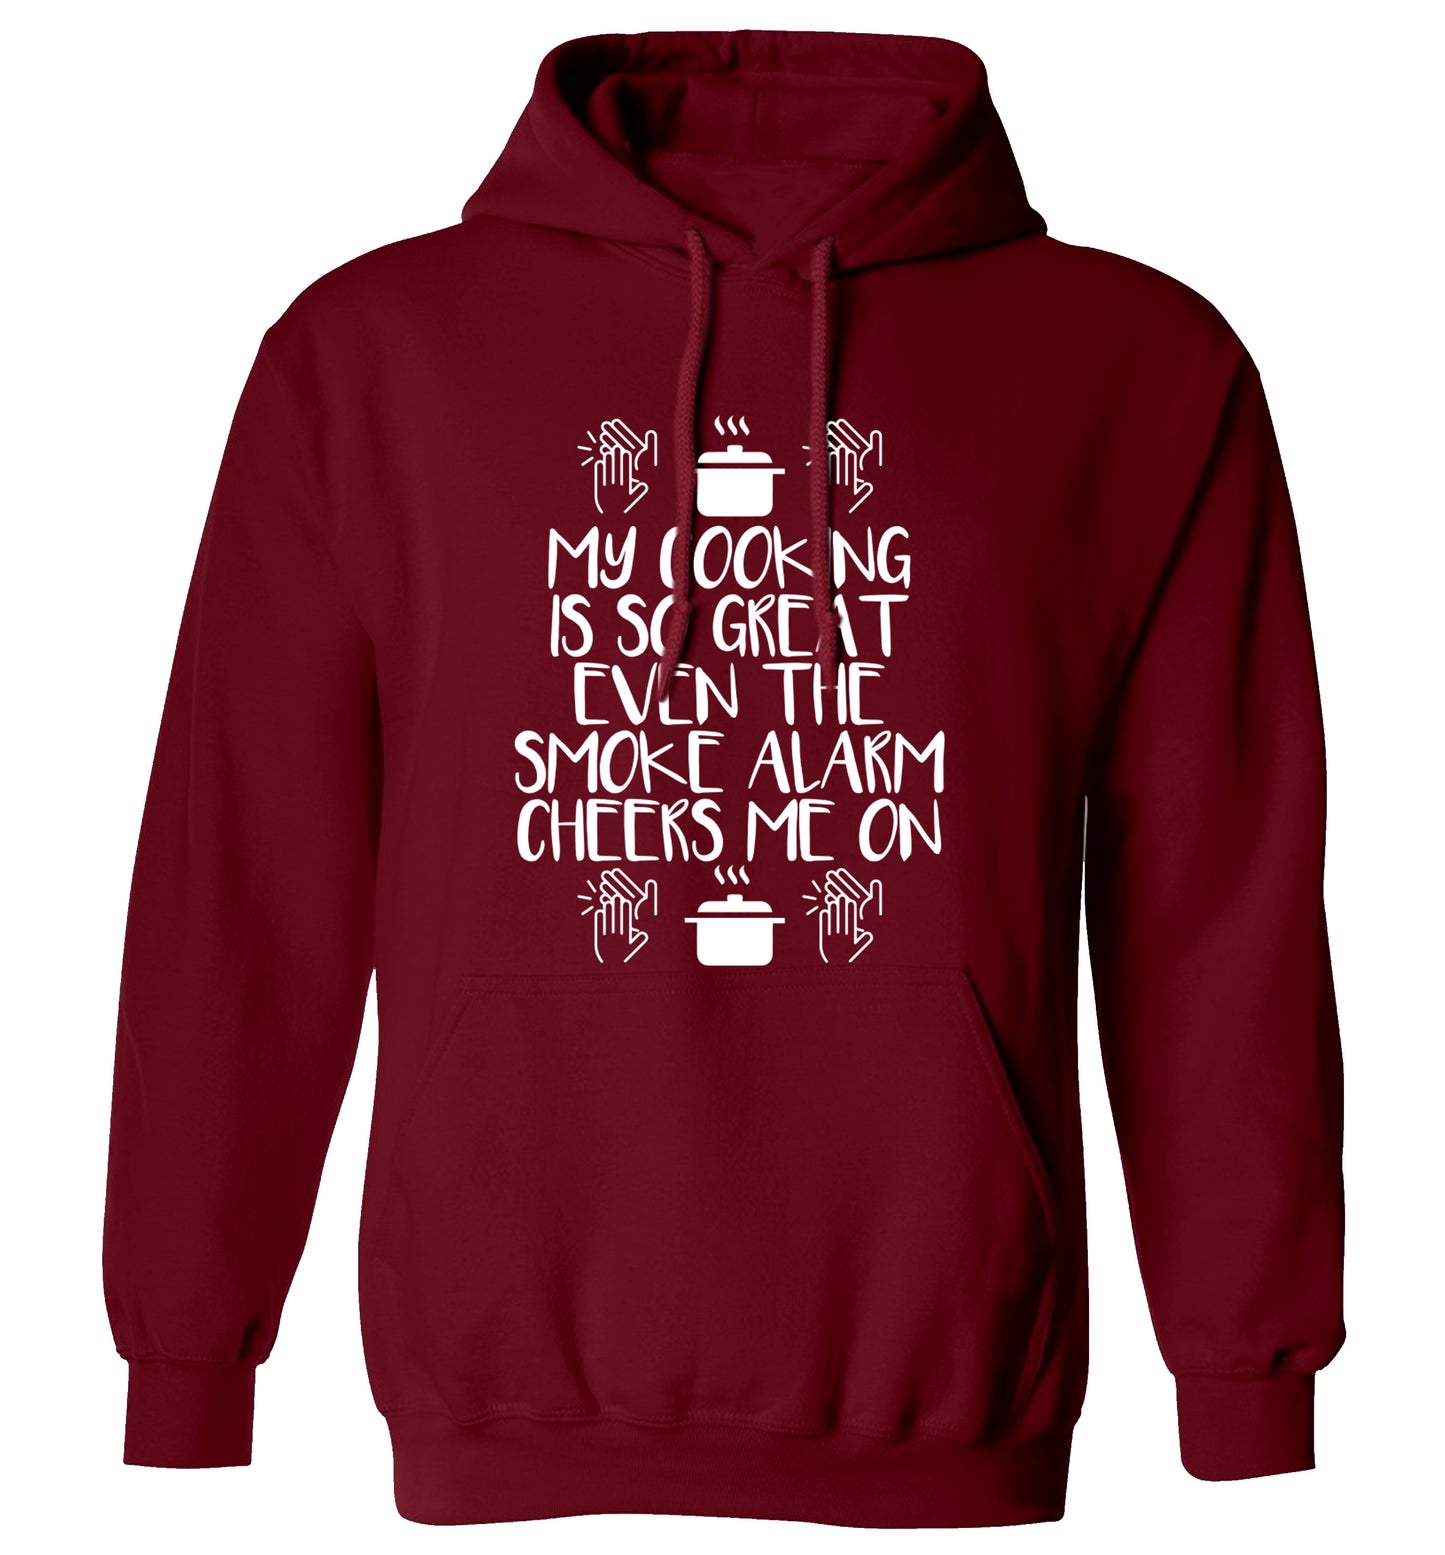 My cooking is so great even the smoke alarm cheers me on! adults unisex maroon hoodie 2XL